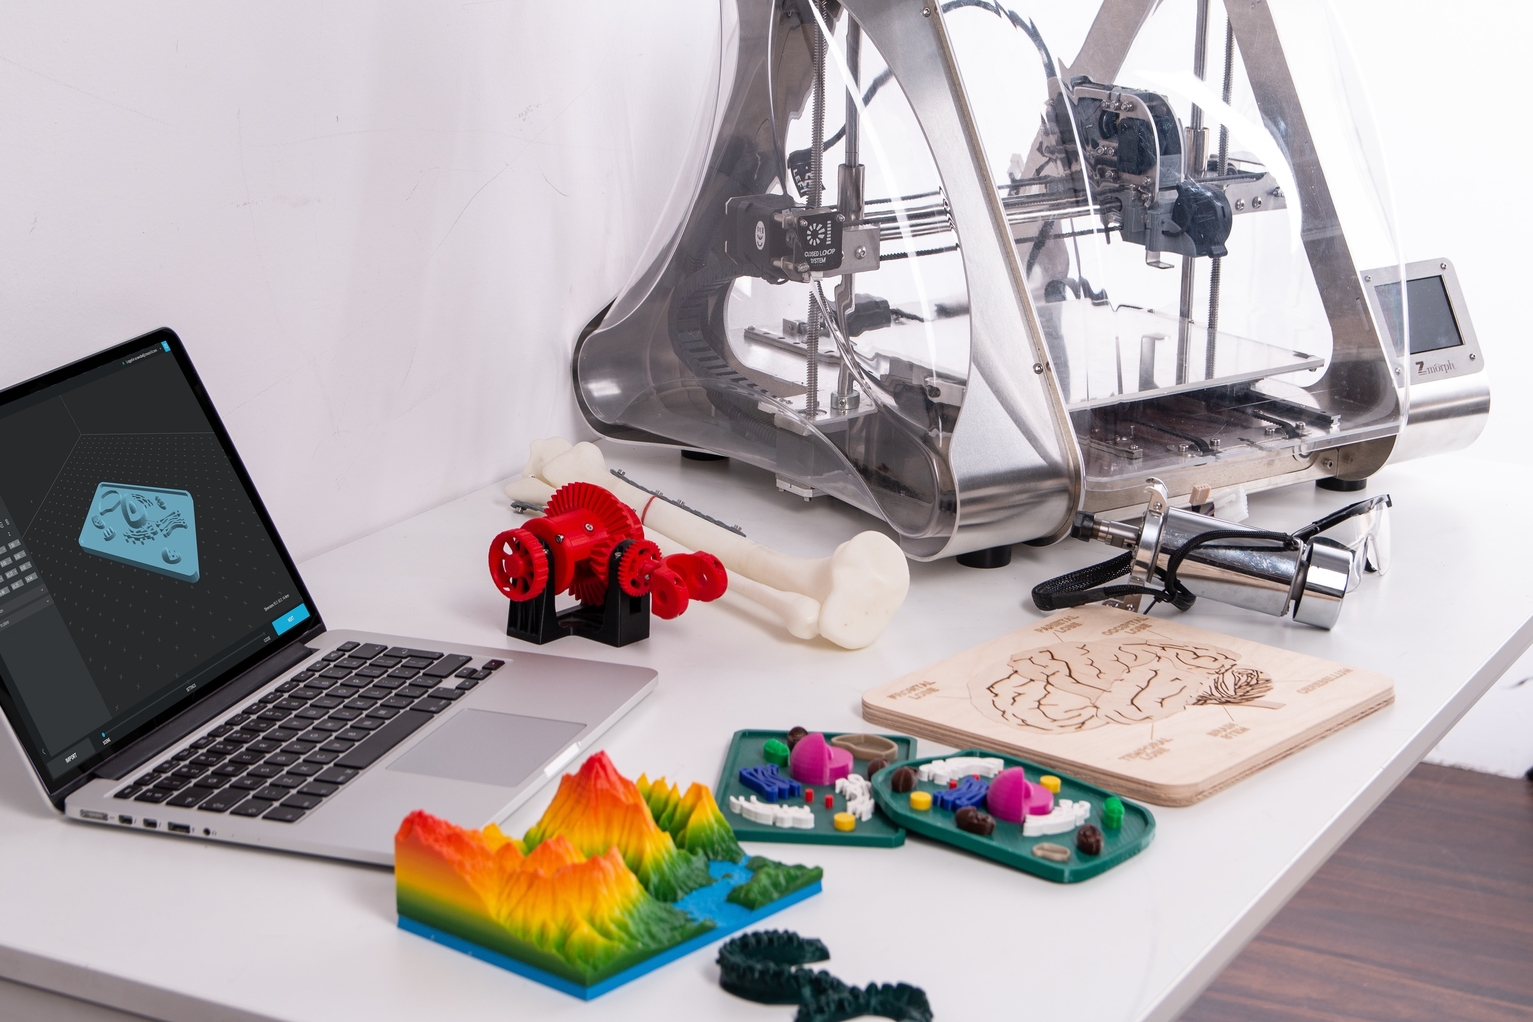 A consumer-grade 3D printer with polymer objects